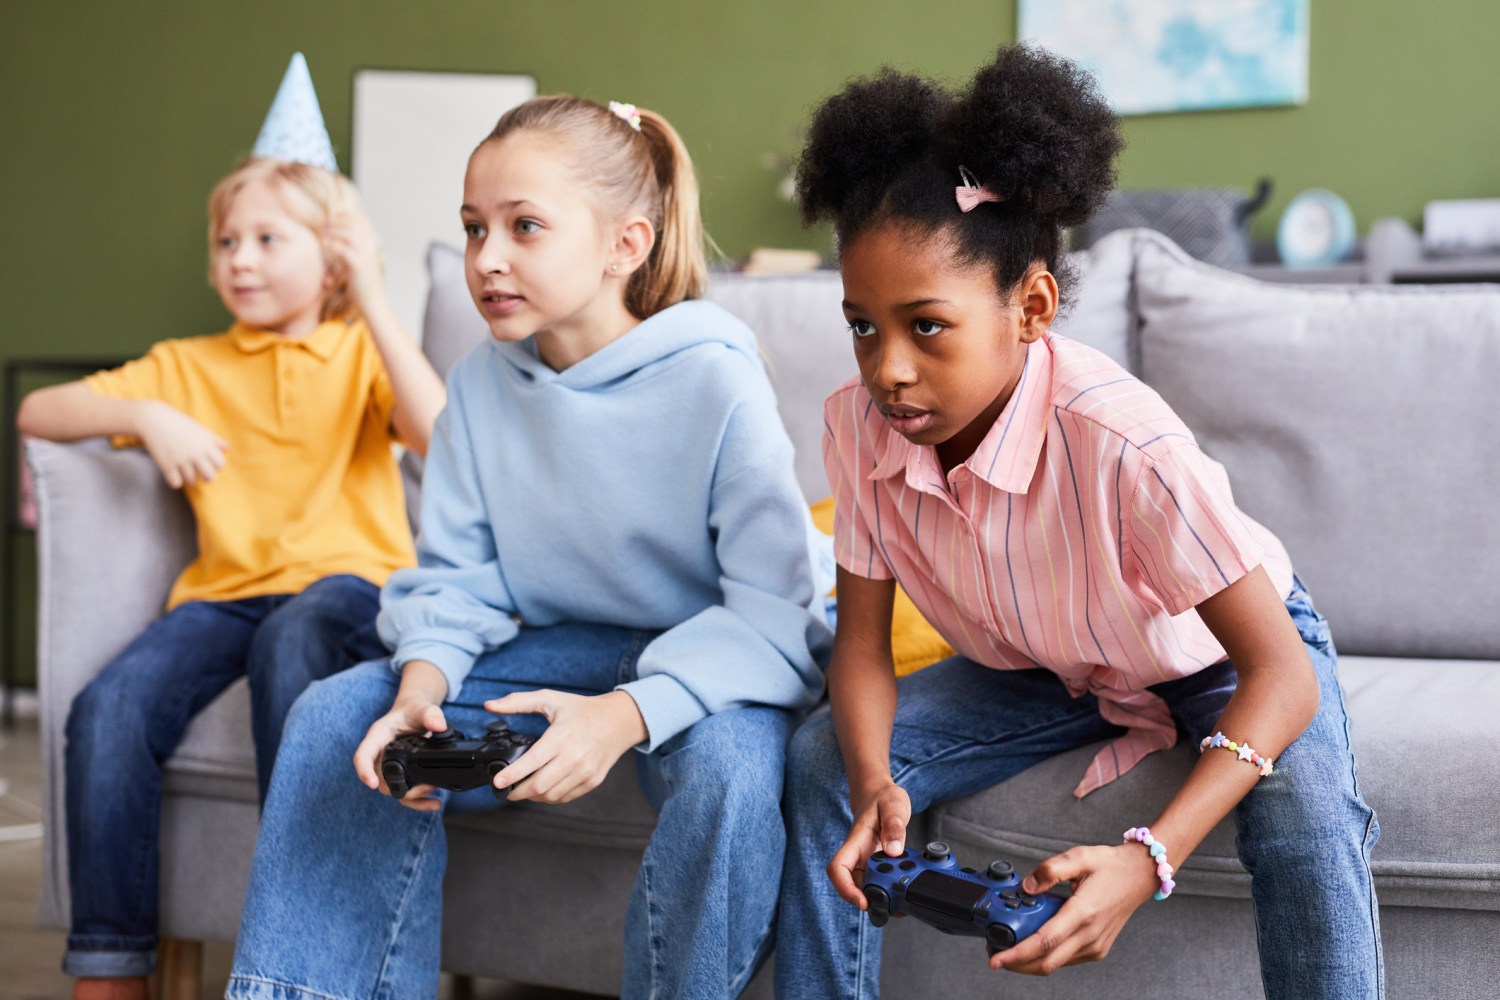 Three children in a living room play video games together.